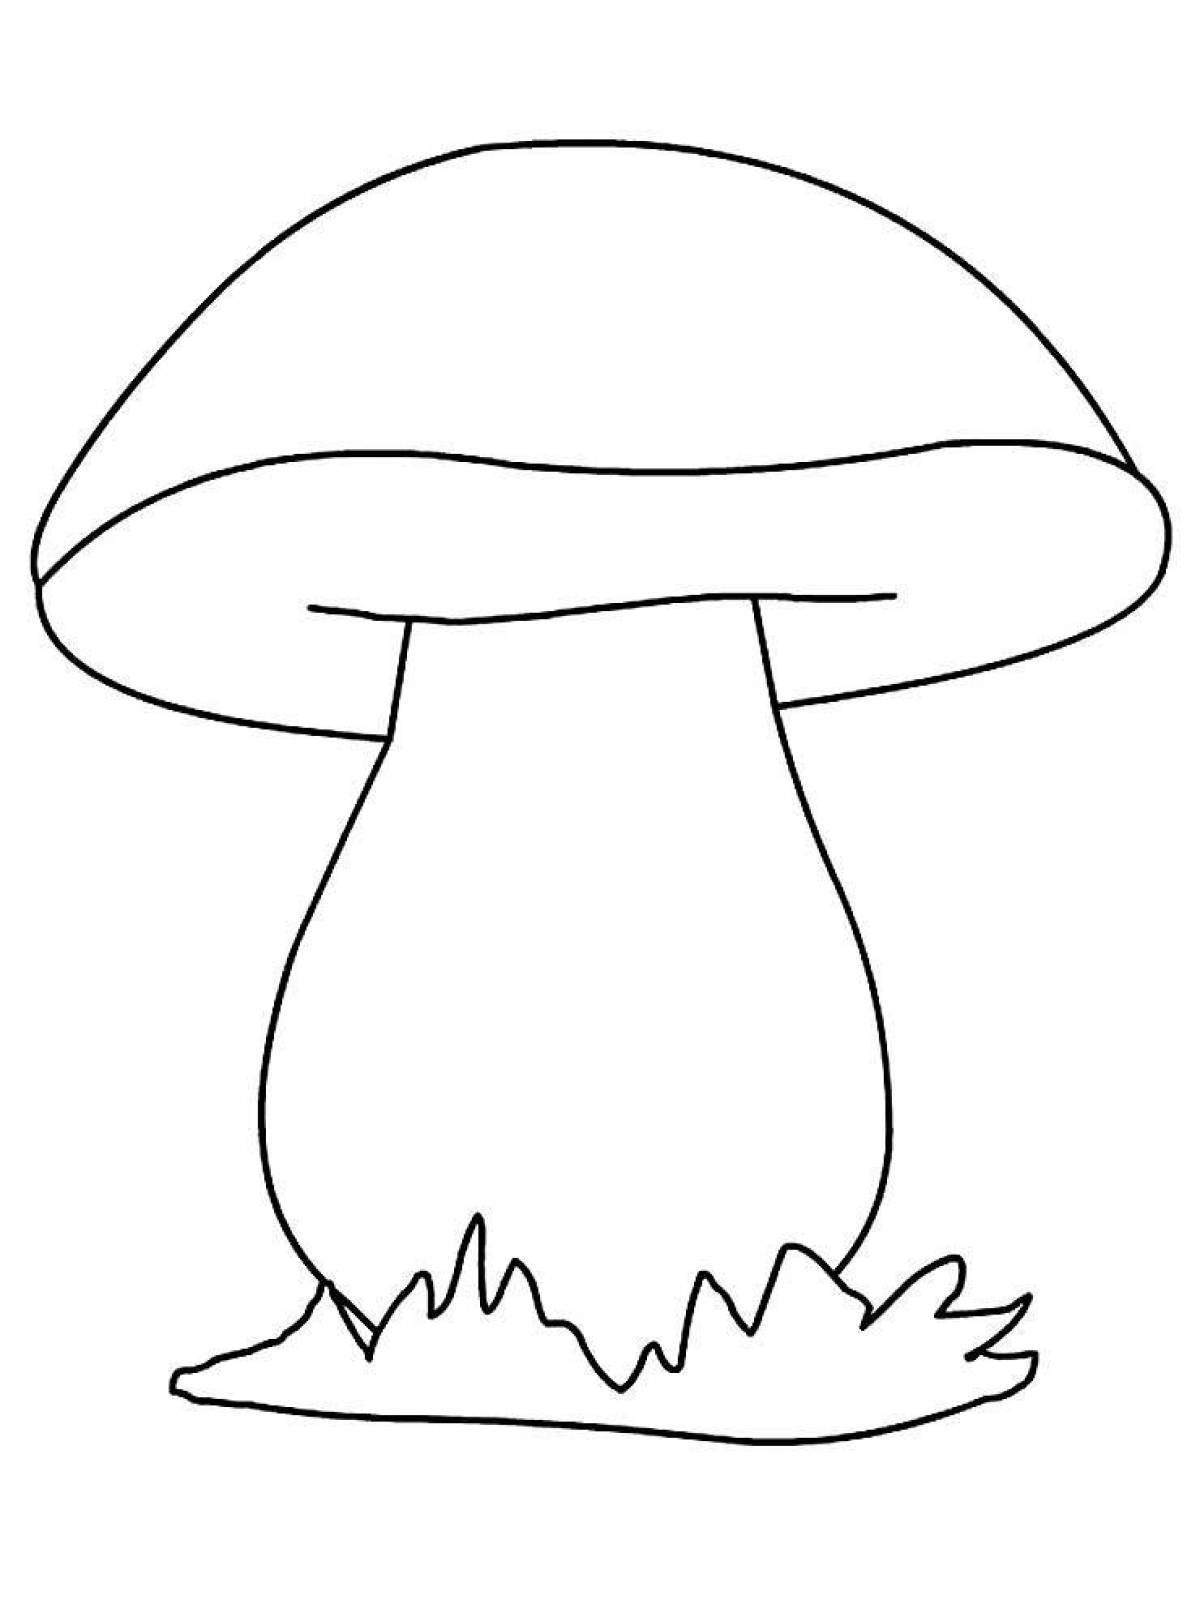 Glowing mushrooms coloring page